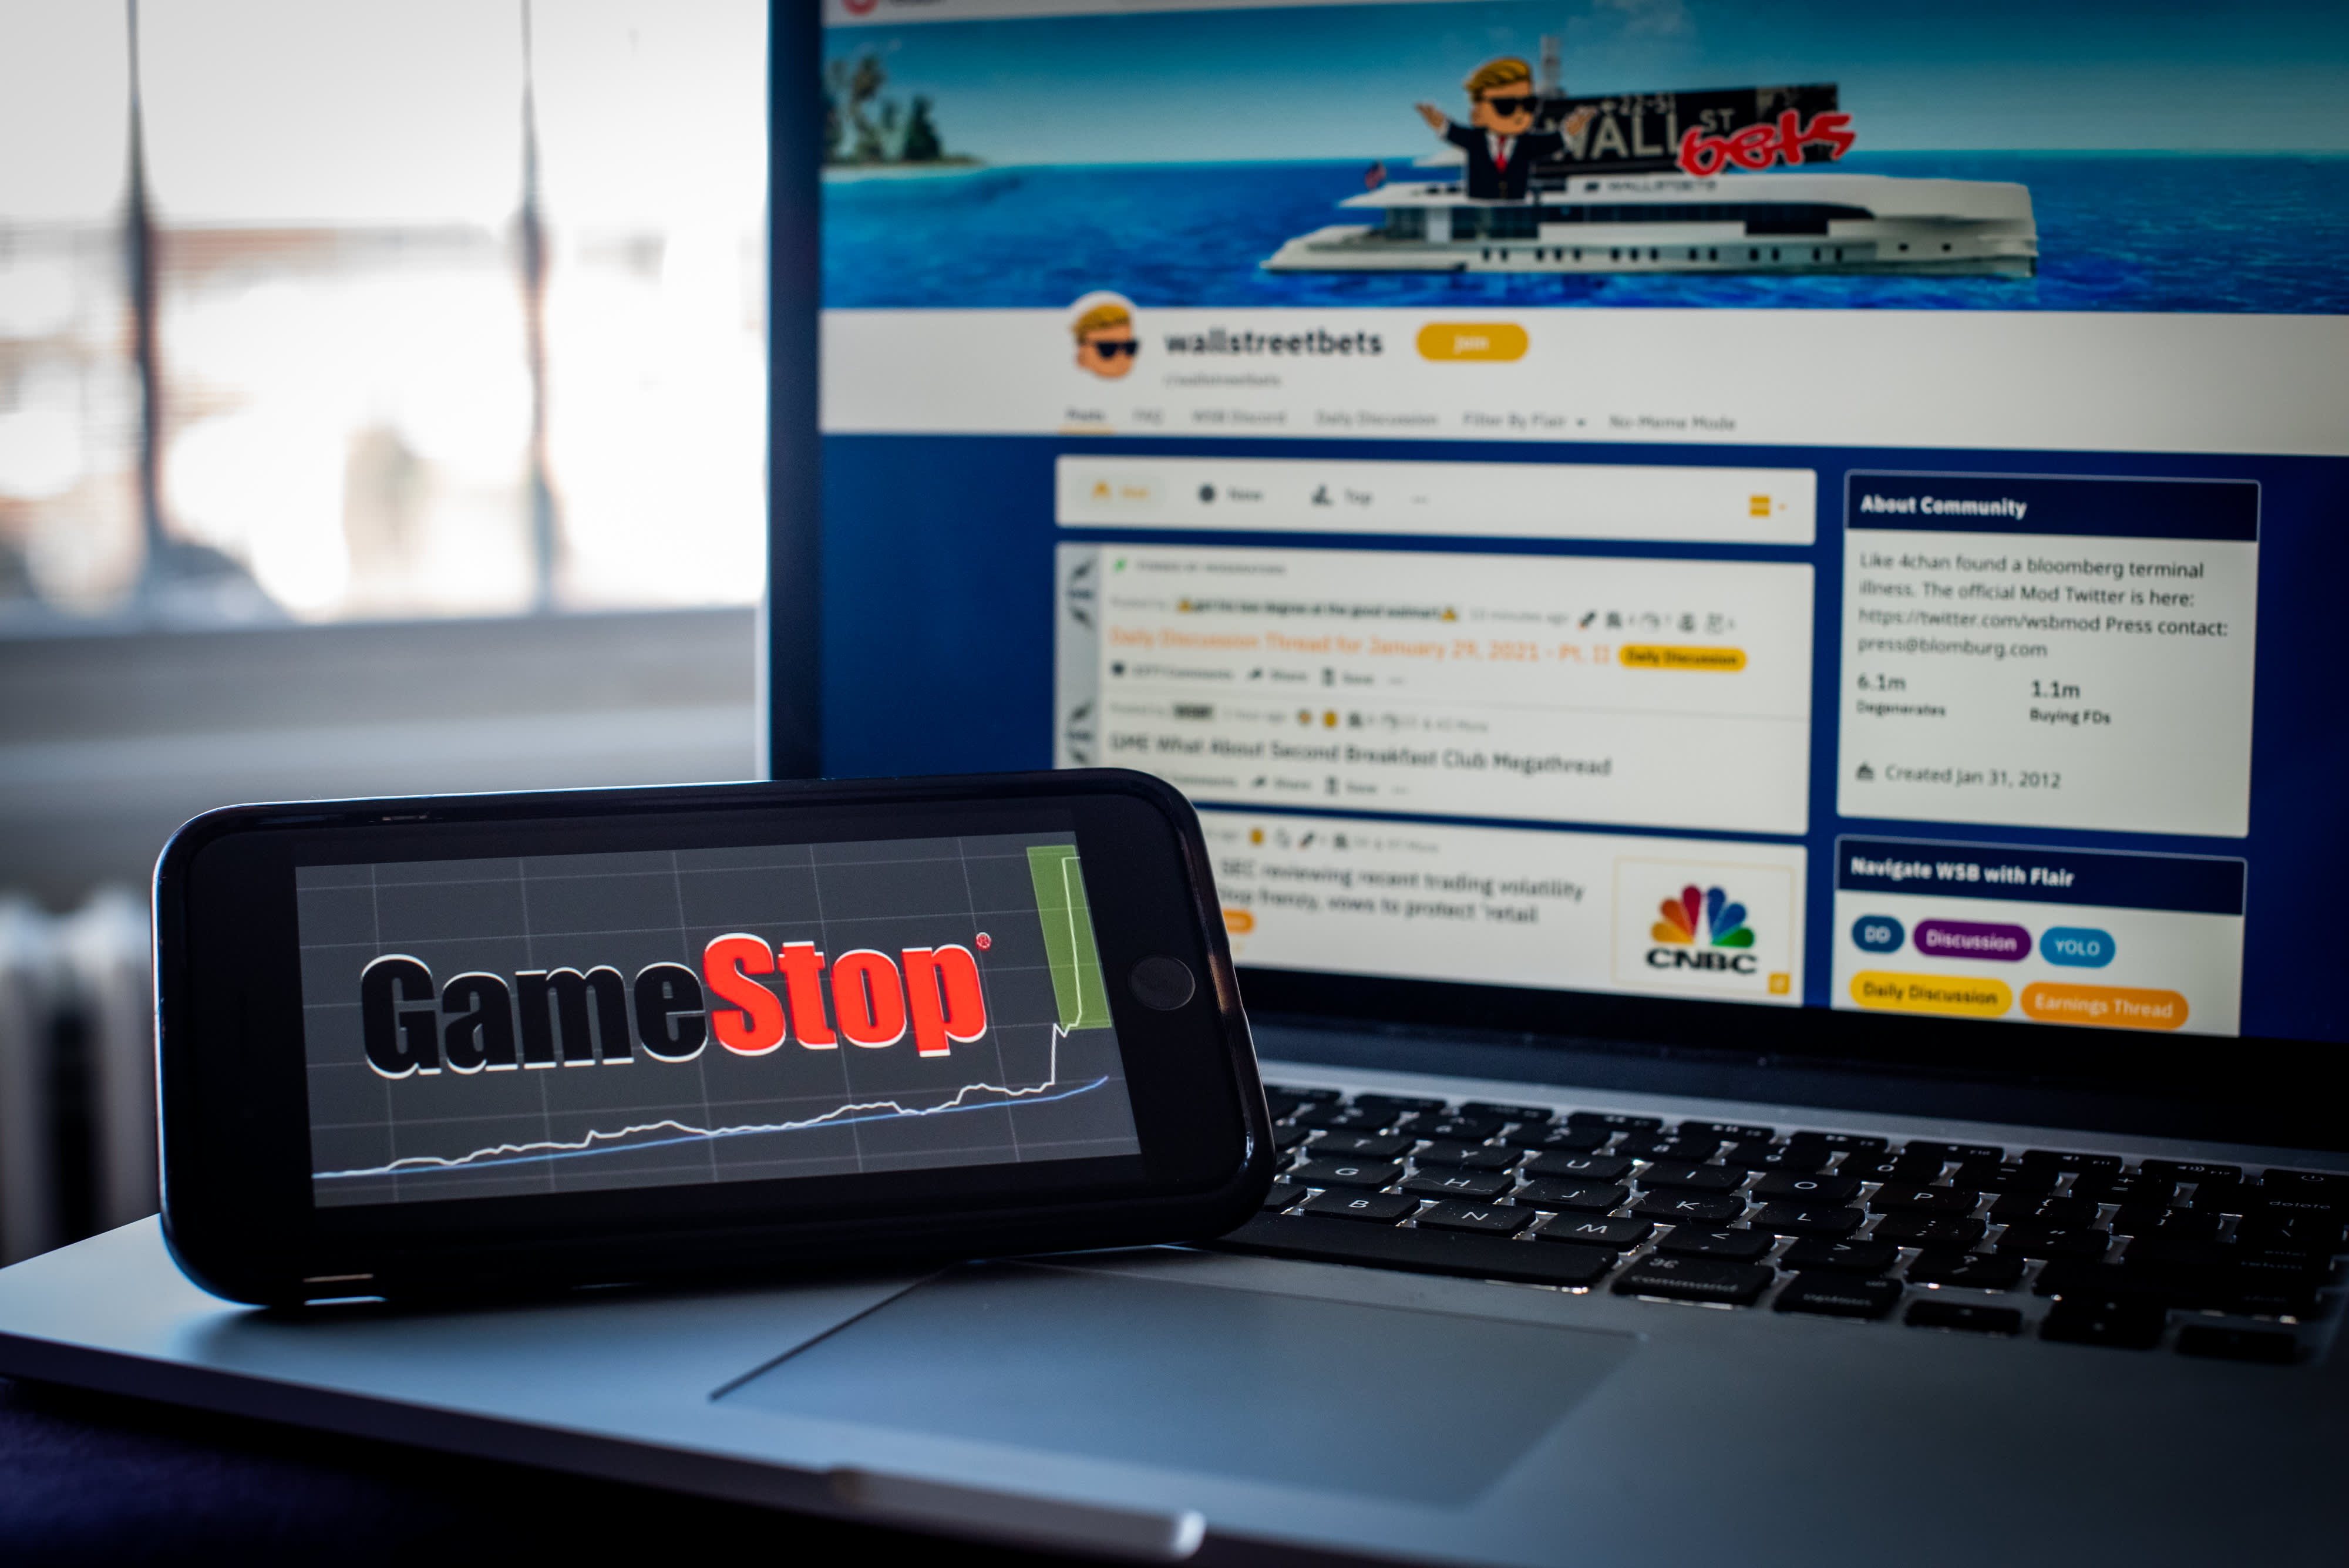 Thomas Peterffy, president of Interactive Brokers, talks about the GameStop frenzy